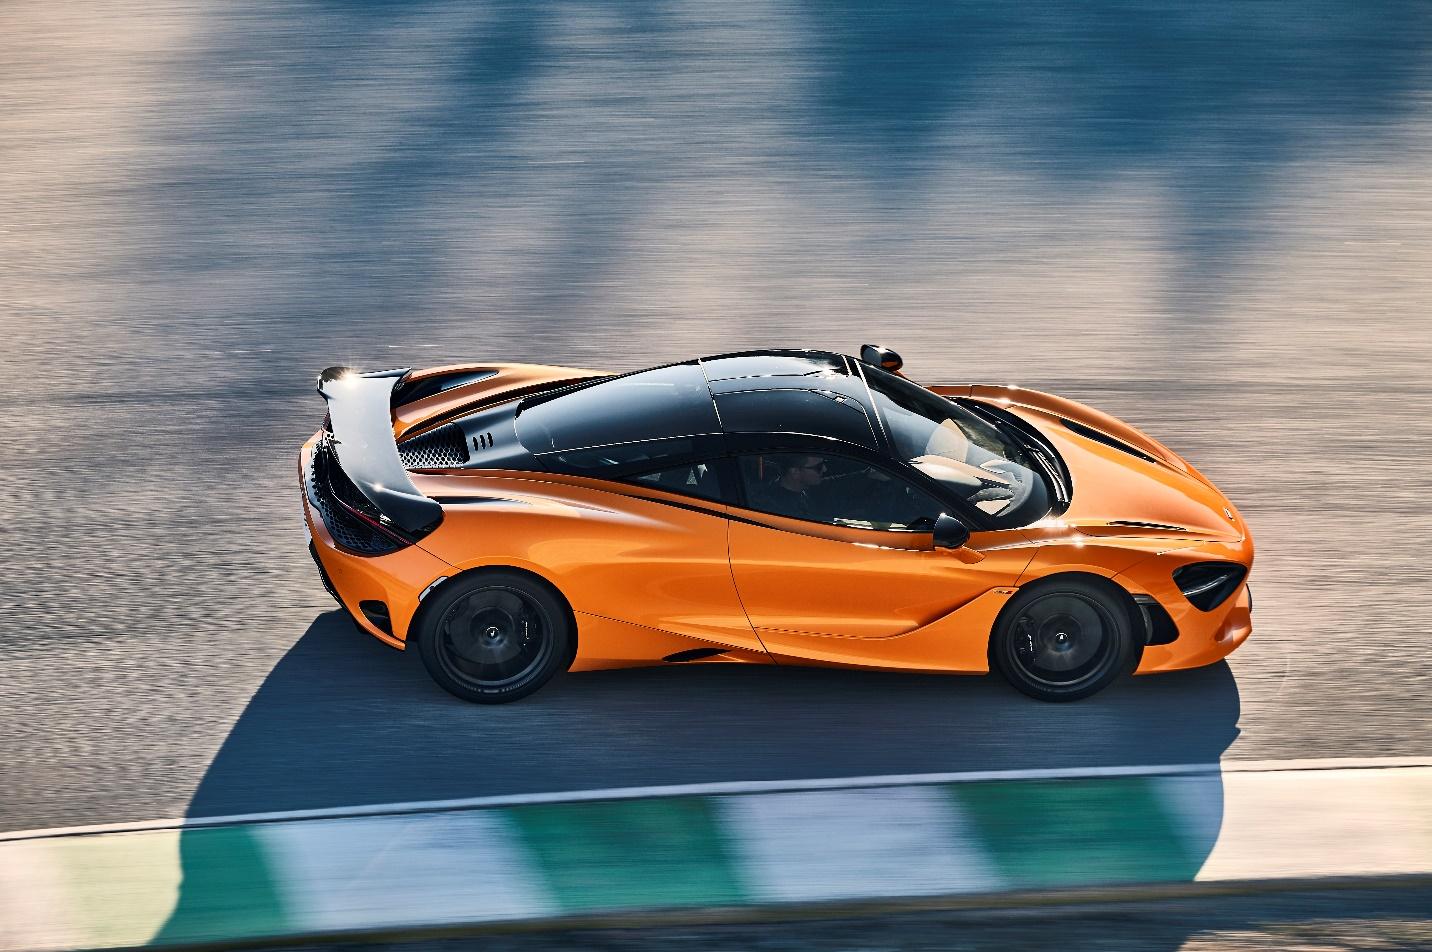 An orange sports car on a road

Description automatically generated